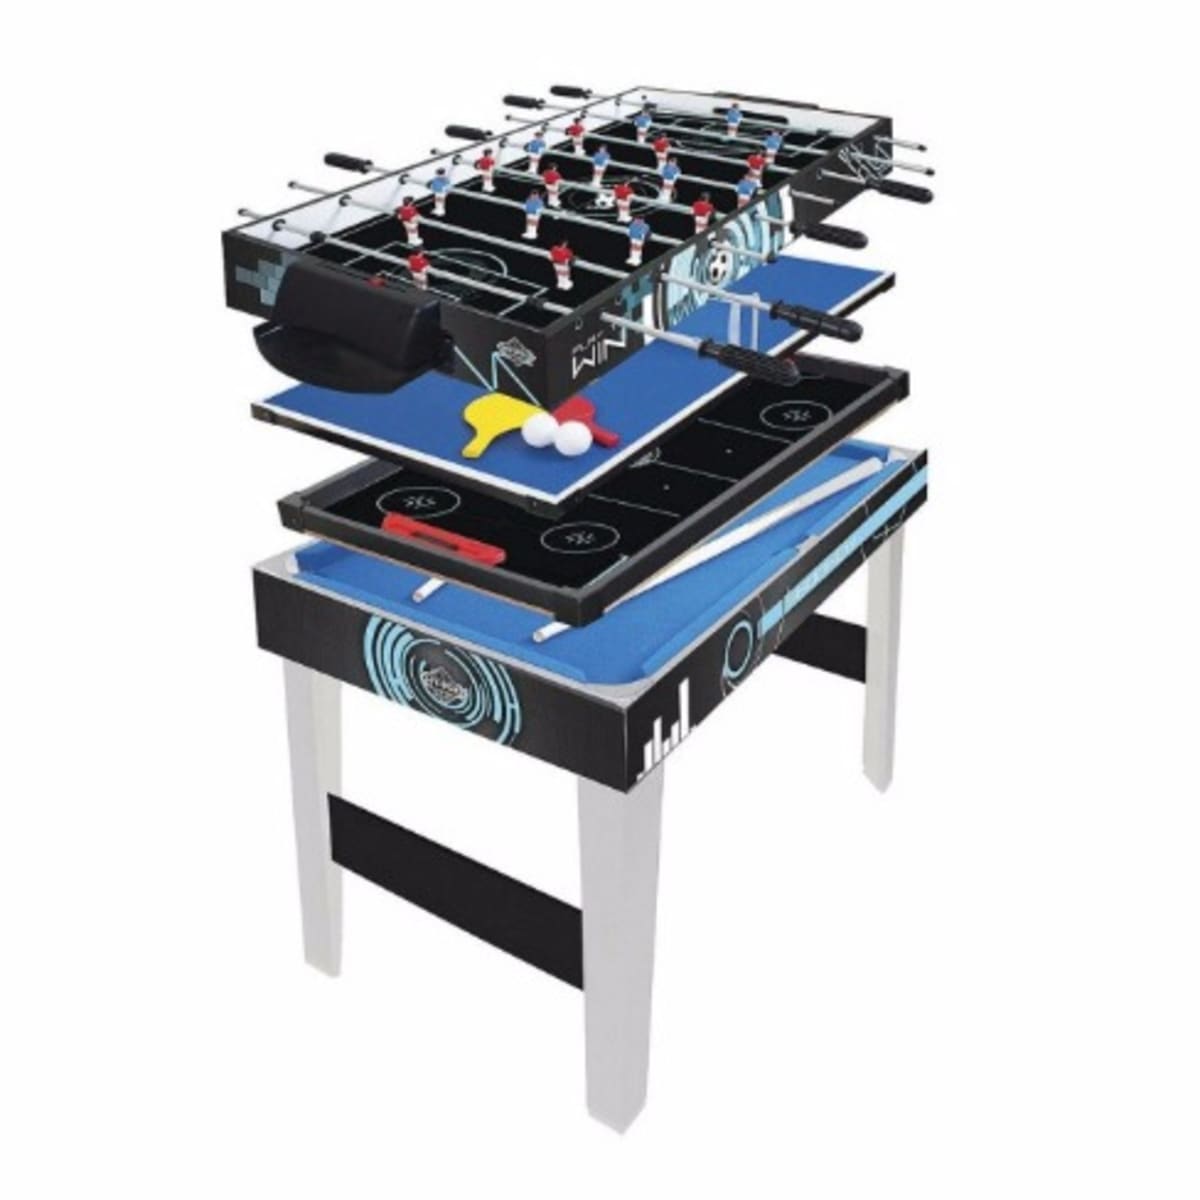 Tesco Hypro Multi Table For Board Games - Football + Pool - Snooker +Tennis and Hockey